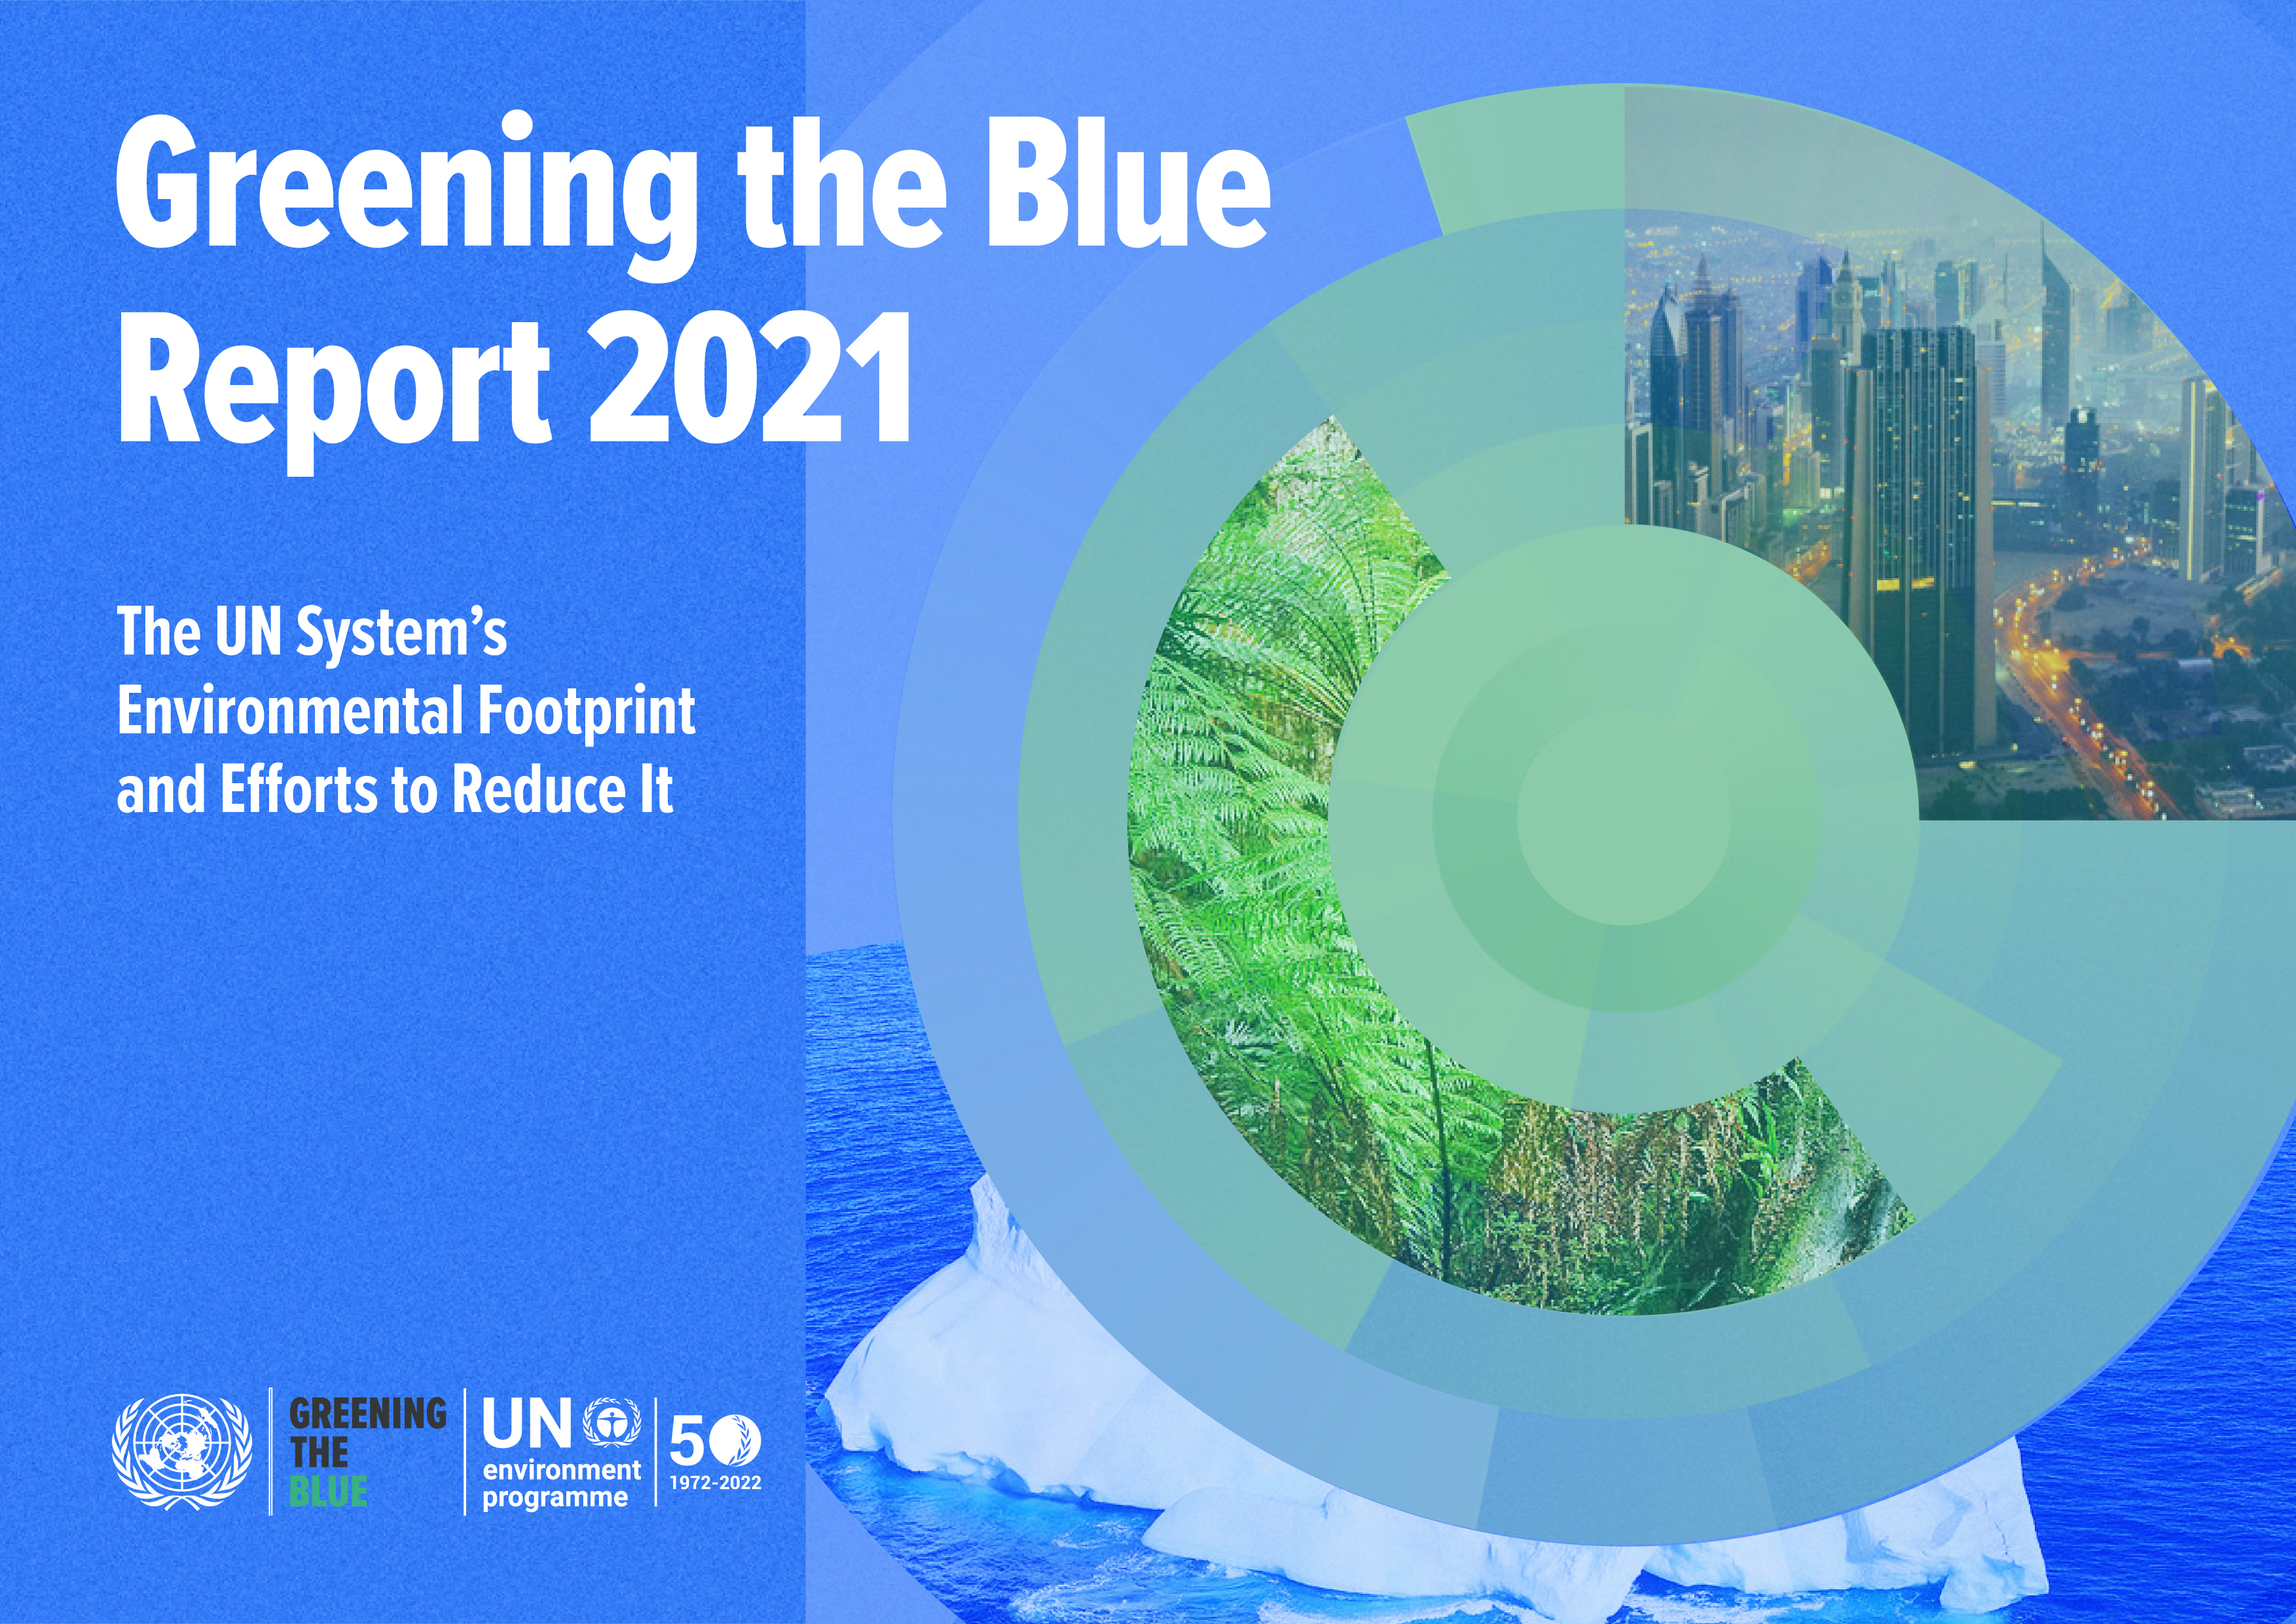 image of Greening the Blue Report 2021